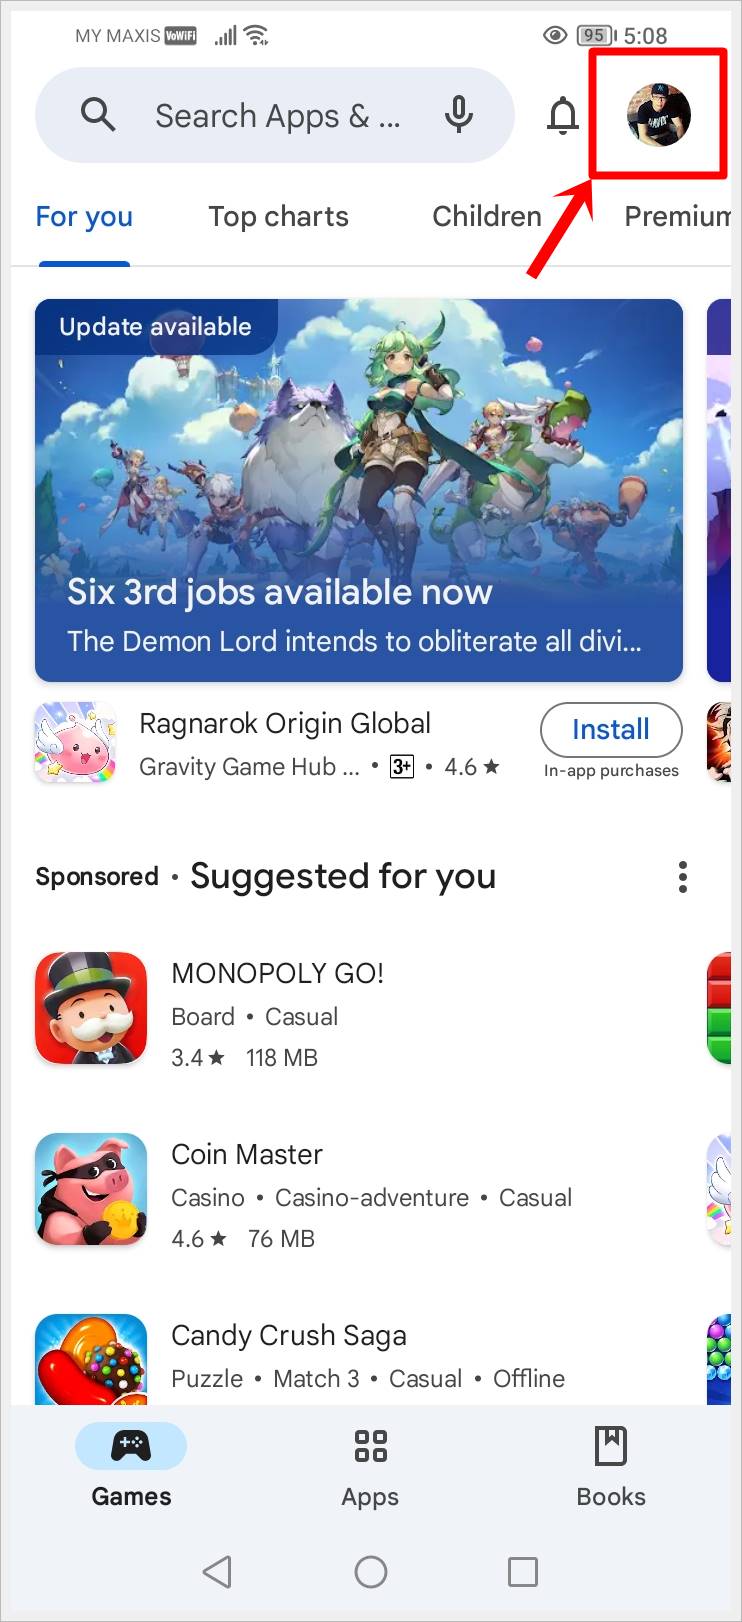 This image shows the Google Play Store app page with the user's "Google Account profile picture" in the top-right corner highlighted.